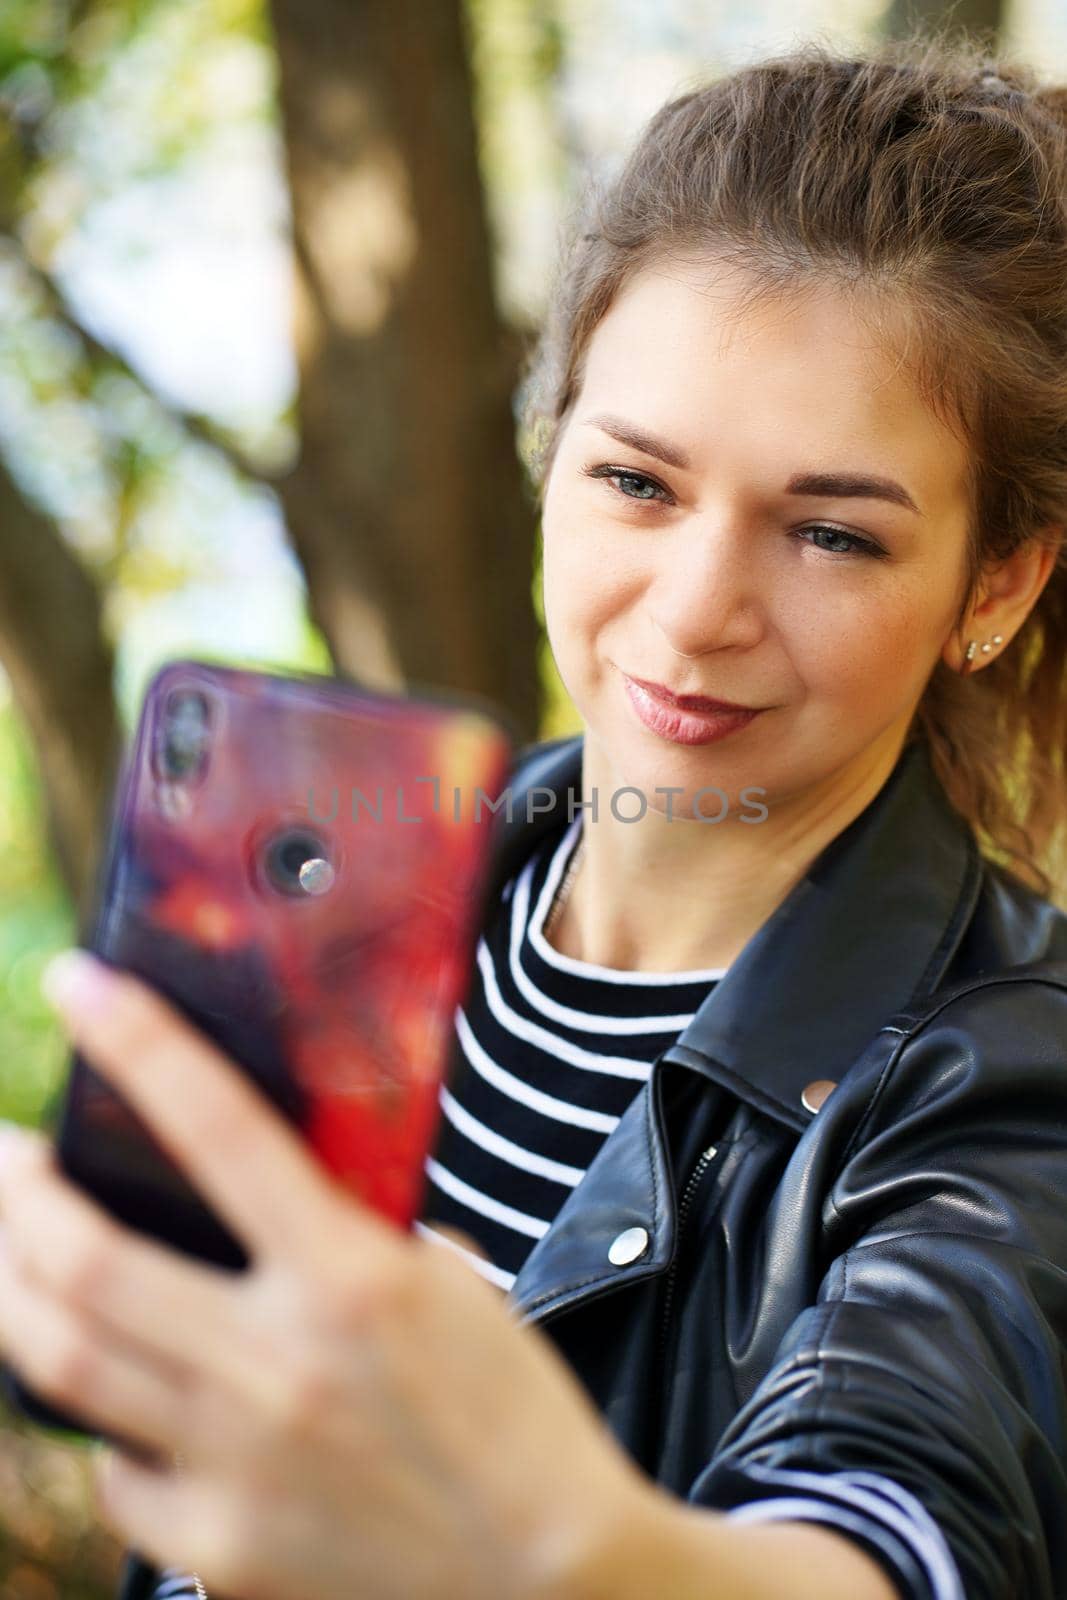 Young woman using smartphone in park. Smiling young female with long hair waving in wind browsing mobile phone while spending autumn day in park.